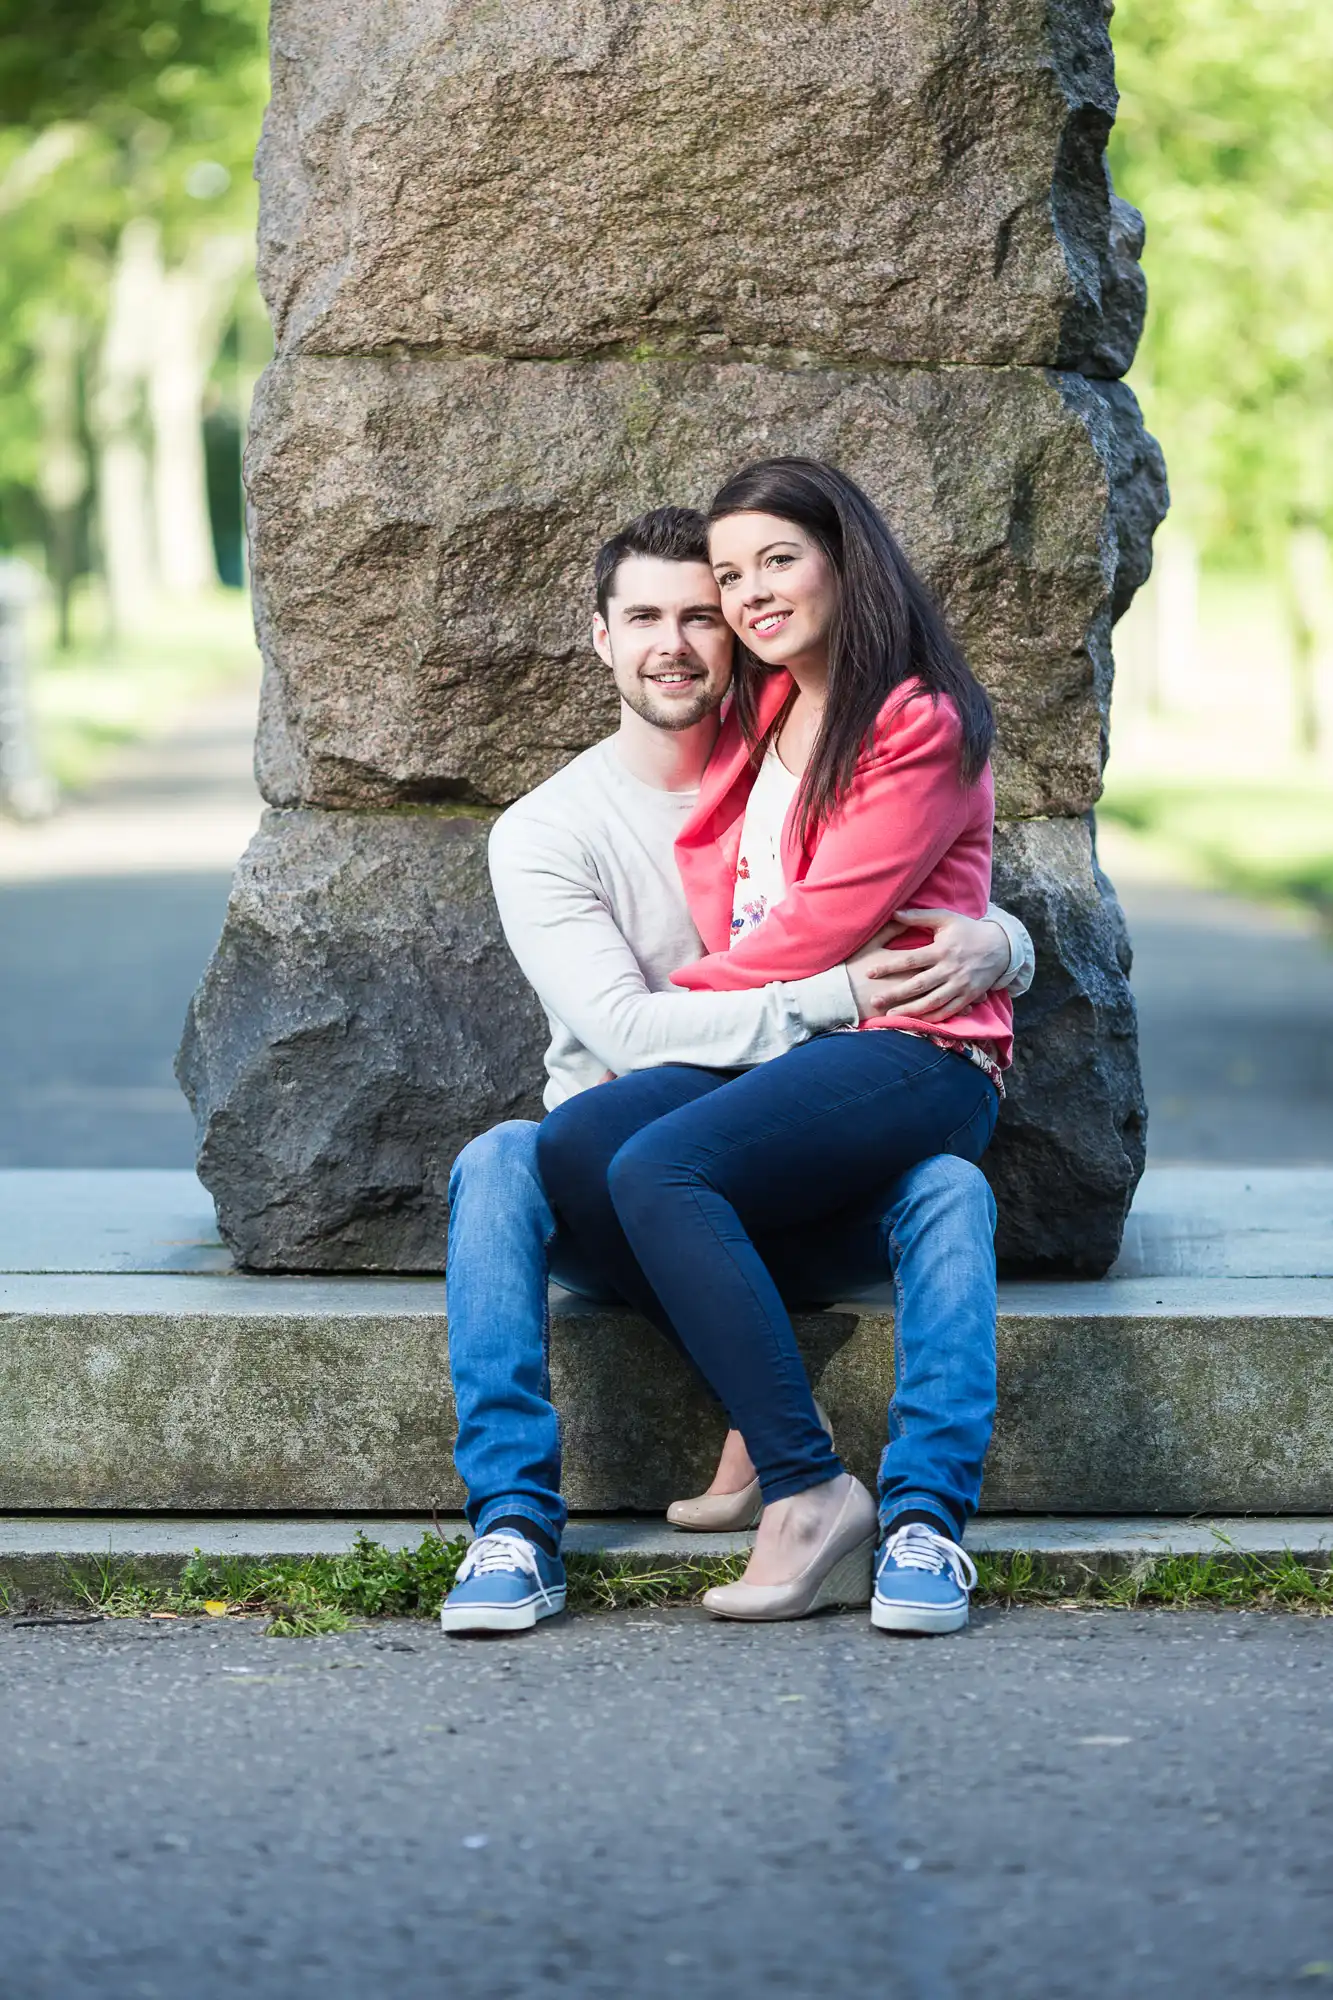 A young couple smiling and sitting closely together on a stone bench in a park, surrounded by trees.